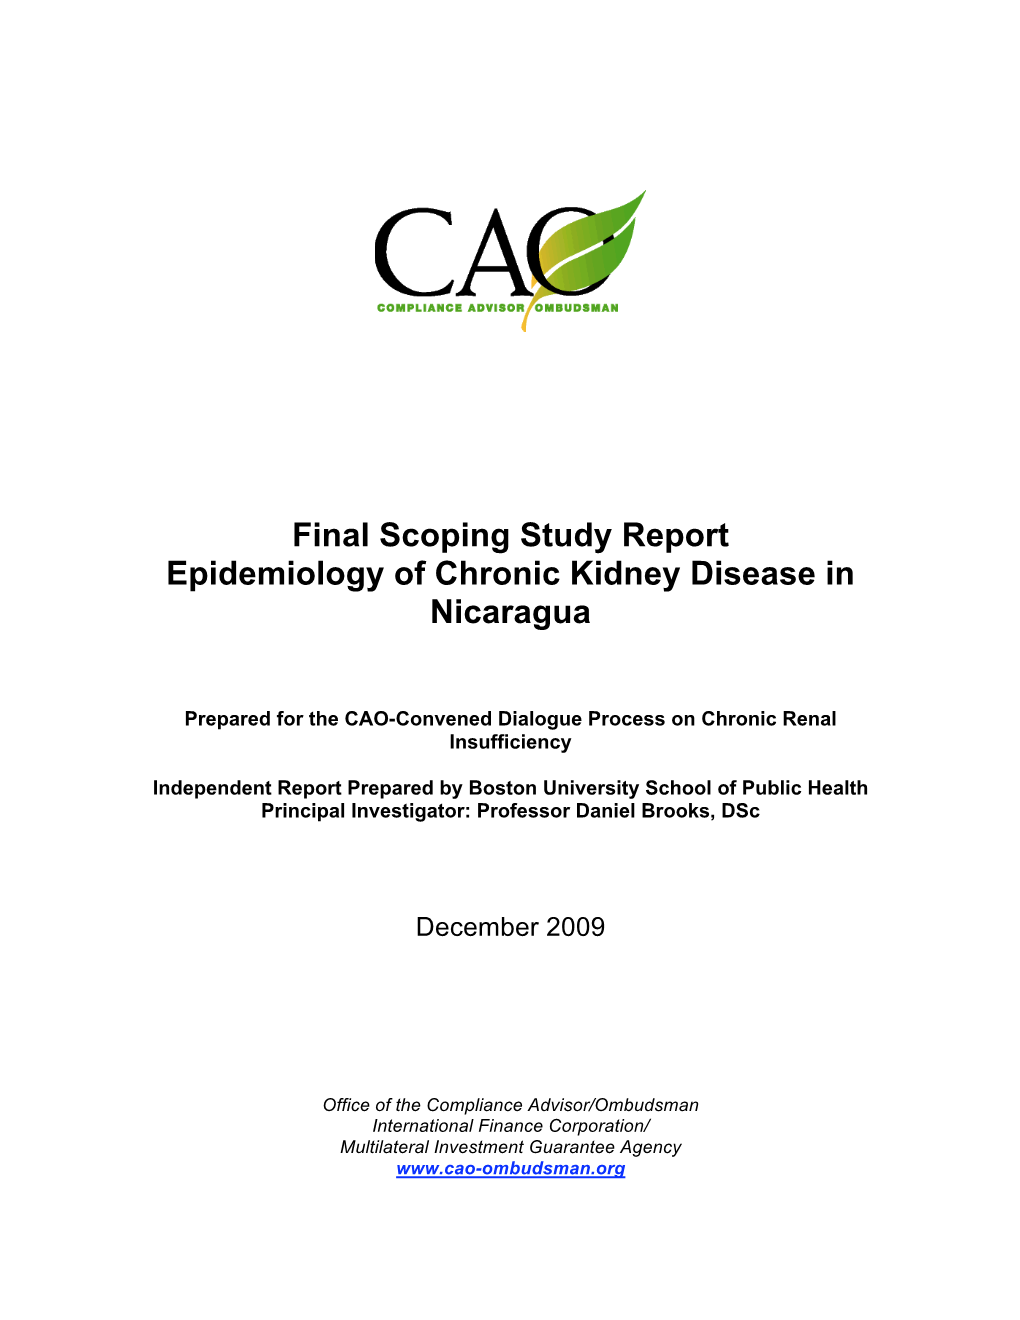 Final Scoping Study Report Epidemiology of Chronic Kidney Disease in Nicaragua